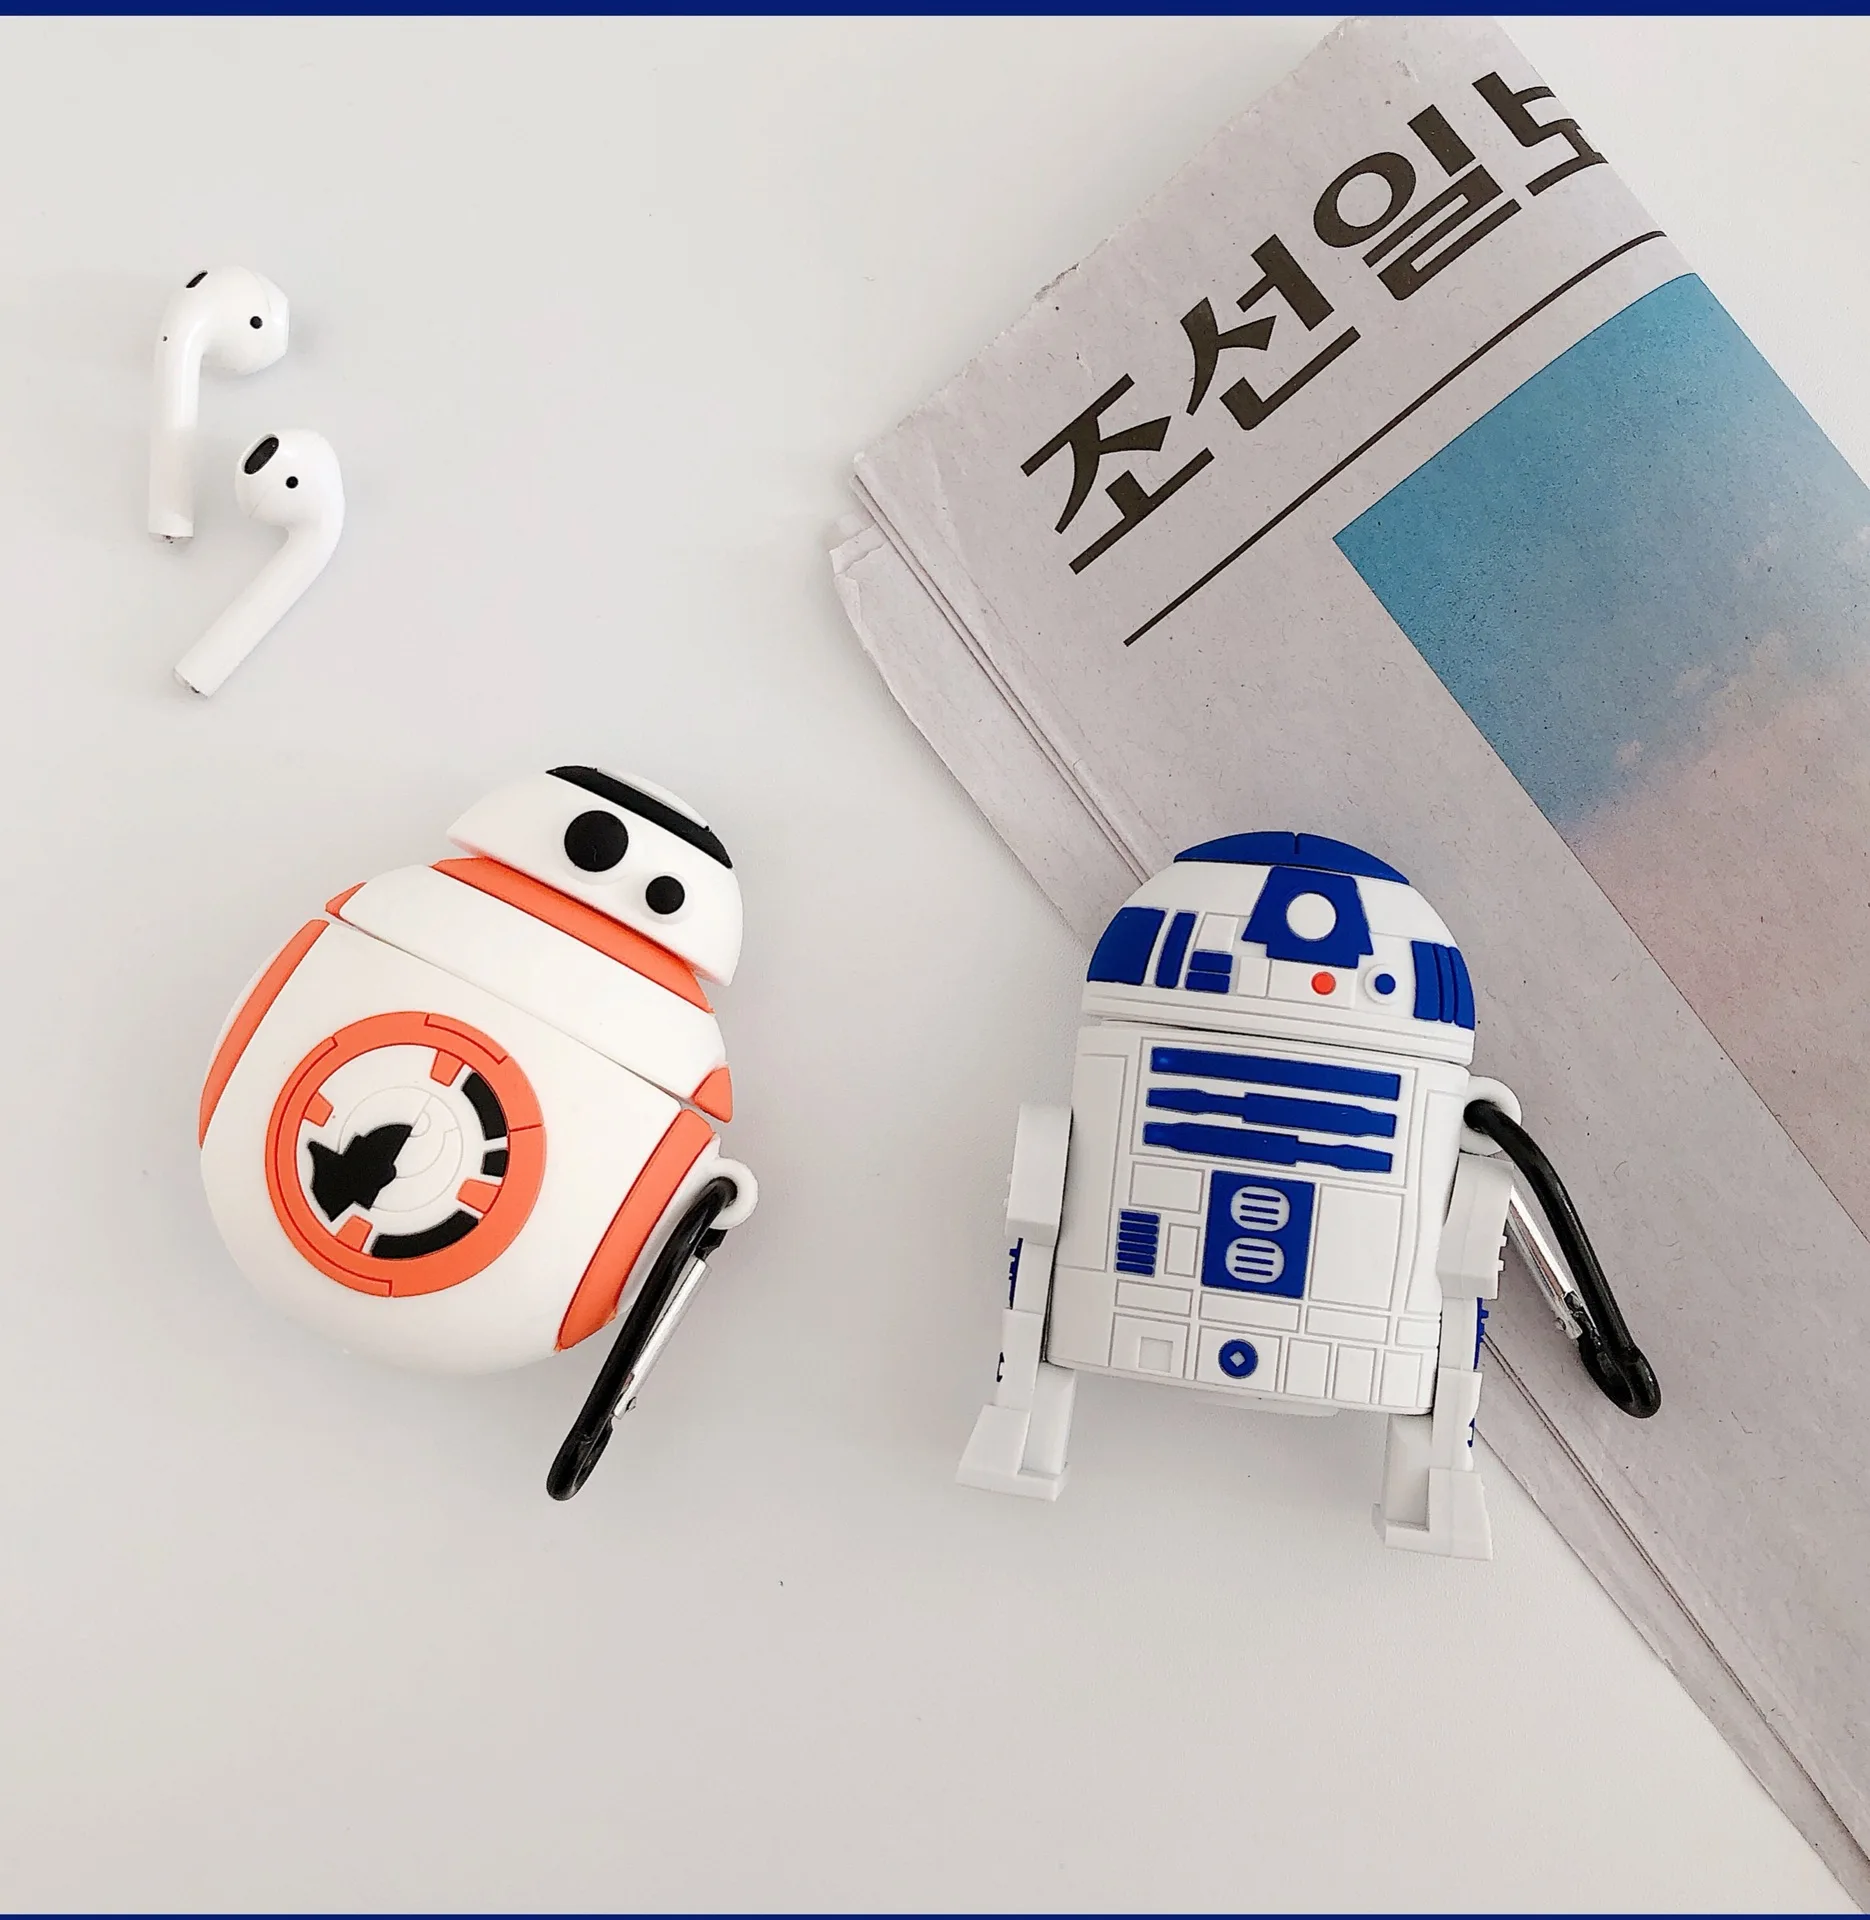 

3D Cute Star R2D2 BB8 Design Earphone Case with Keychain for Airpods Pro Cartoon Robot Style Protective Cover for Airpod 1/2